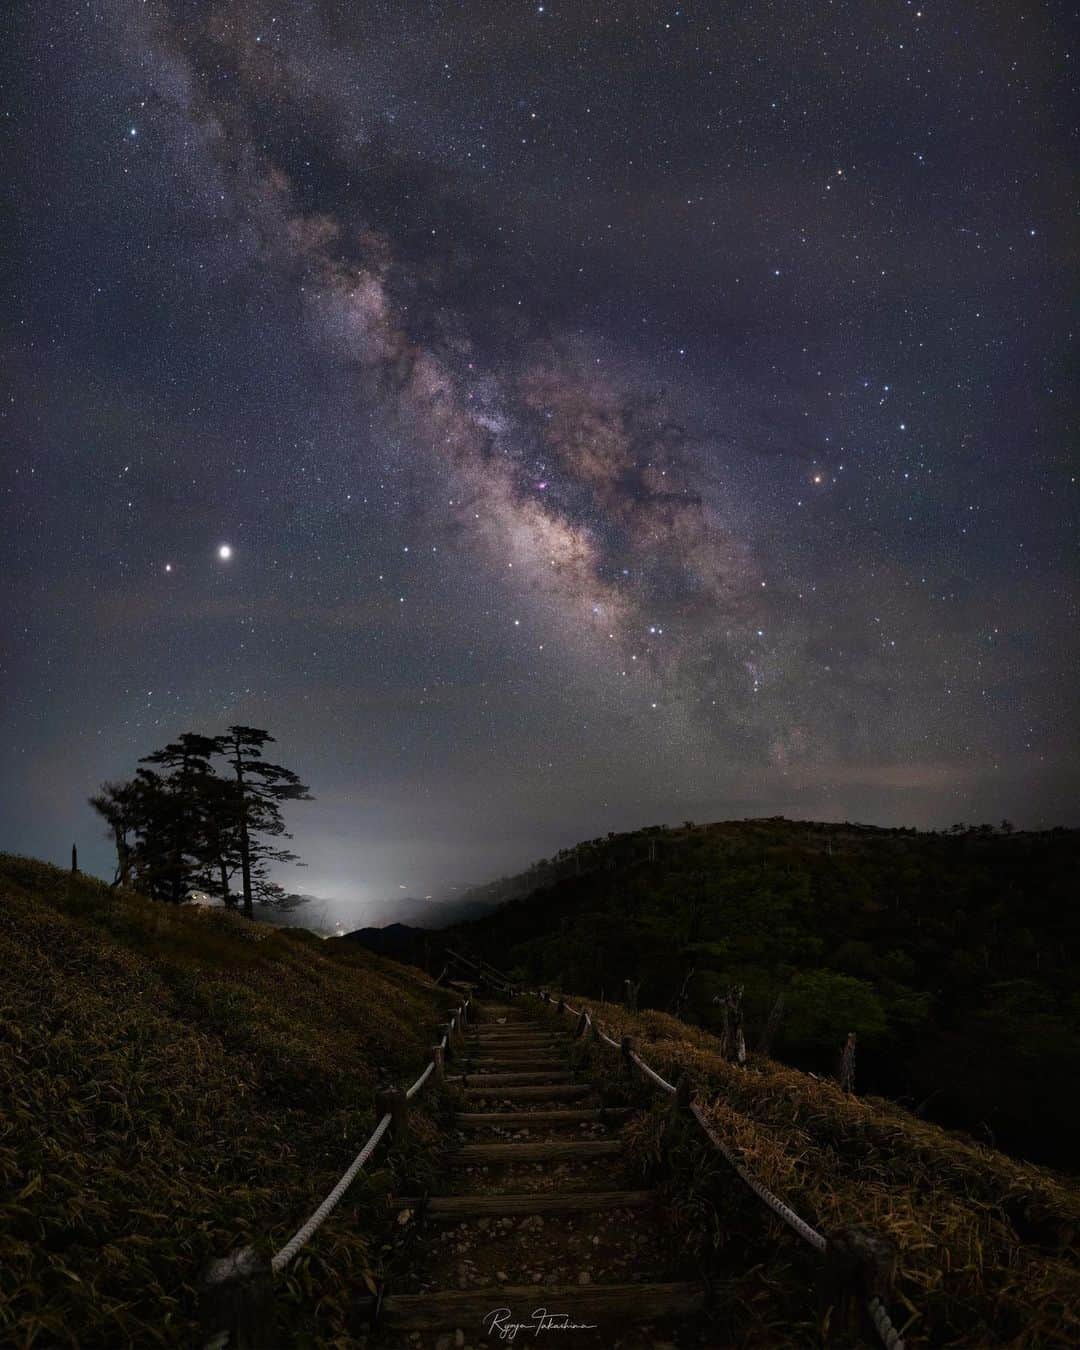 Ryoyaのインスタグラム：「I went to Oodaigahara which is one of the darkest area in Japan to shoot Milky Way🌠 Had to walk through a forest where wild bear live but it was worth it ;) camera : #GFX100 lens : #GF23mm Star tracker : #ioptronskyguiderpro  Sky : ISO3200 / f4 / ss 60s / 4 images merged to panorama Foreground : ISO3200 / f4 / ss 60s  #milkyway #大台ヶ原 #天の川 #星空 #野生の熊に注意🧸」